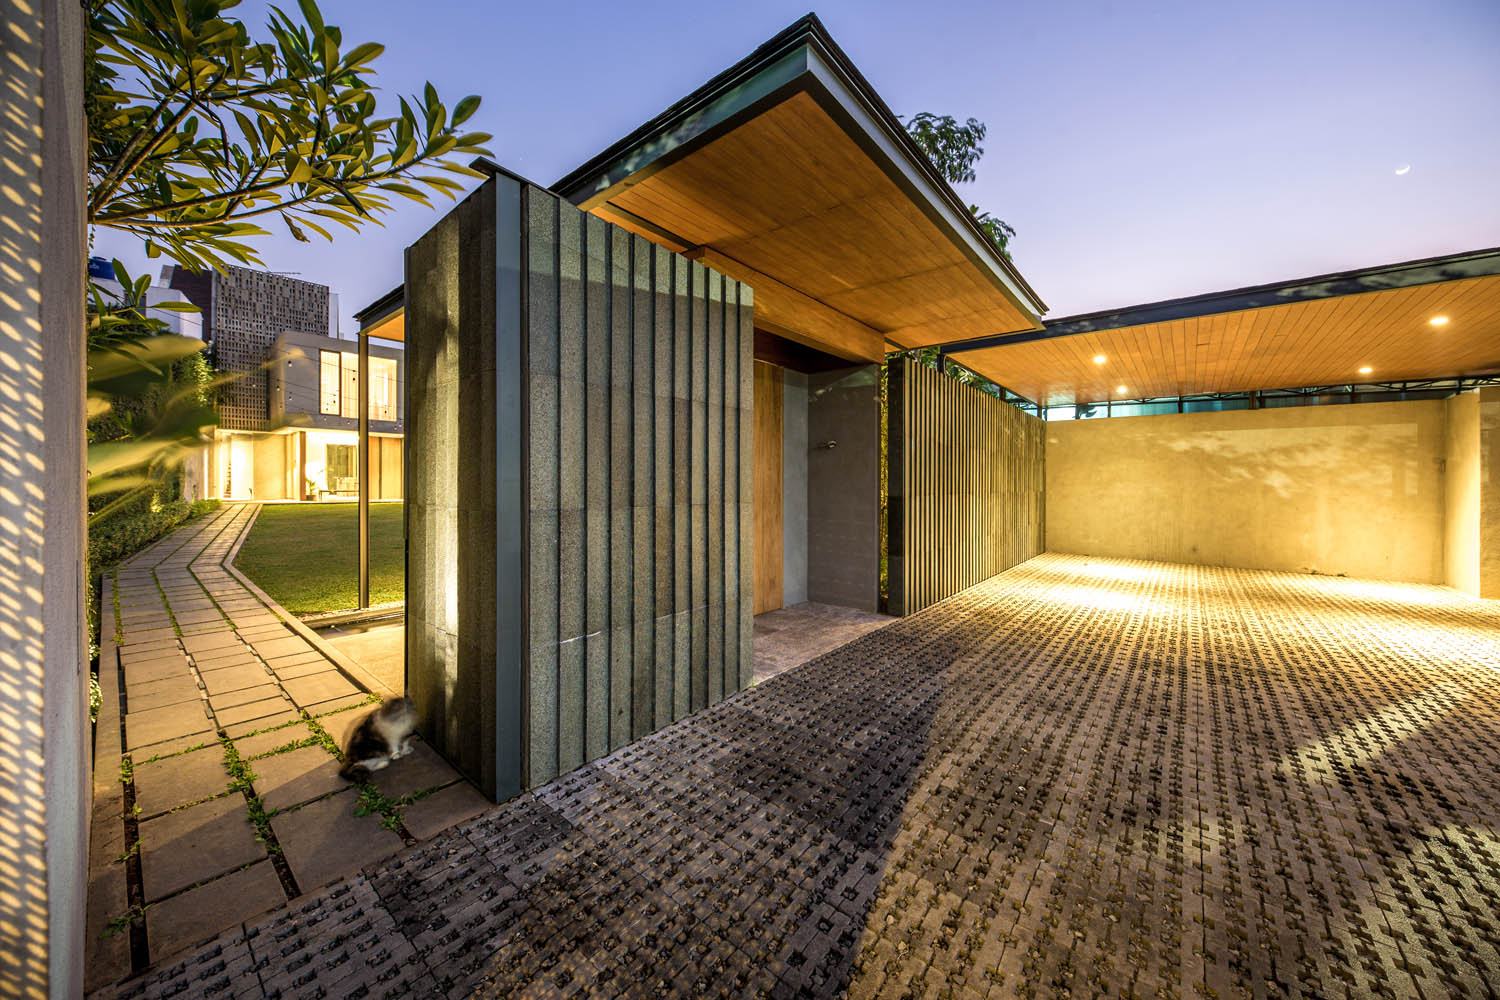 ArMS Creates a Basalt Envelope for a House Renovation in Jakarta